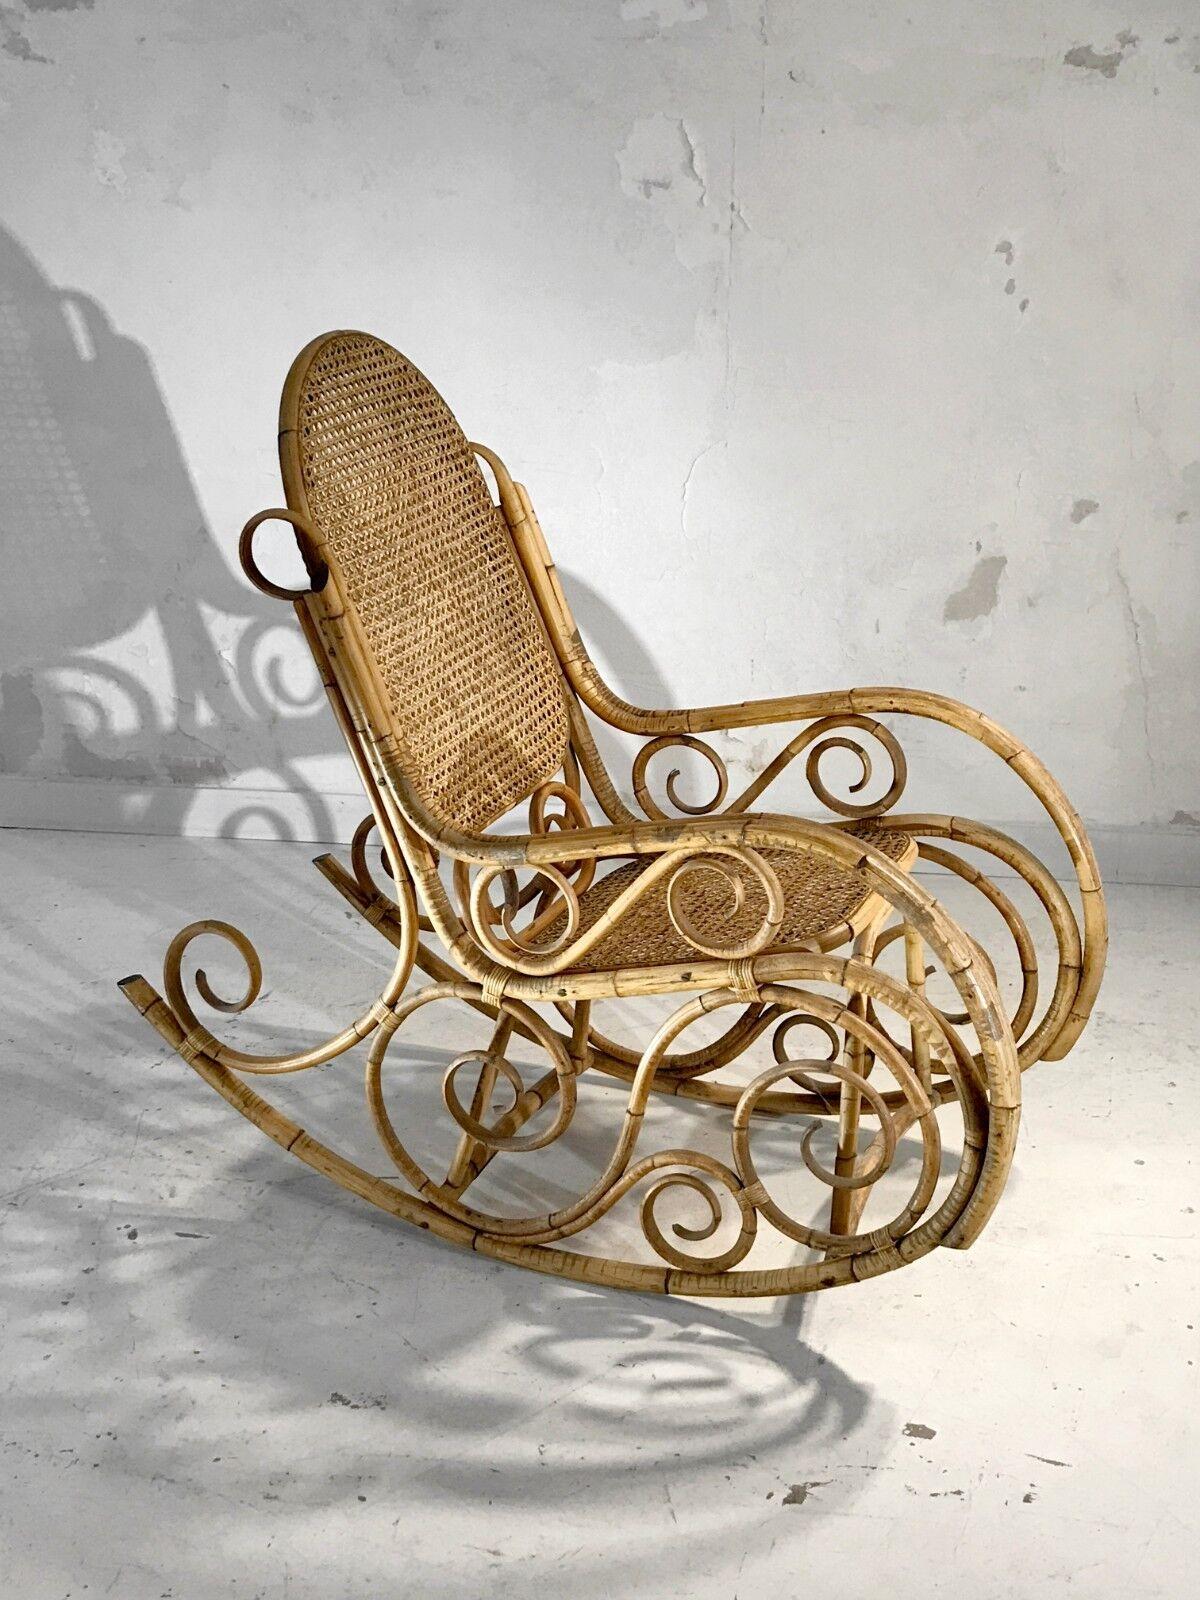 Art Nouveau An Early MODERN NEO-CLASSICAL FREE-FORM ROCKING-CHAIR by THONET, France 1900 For Sale